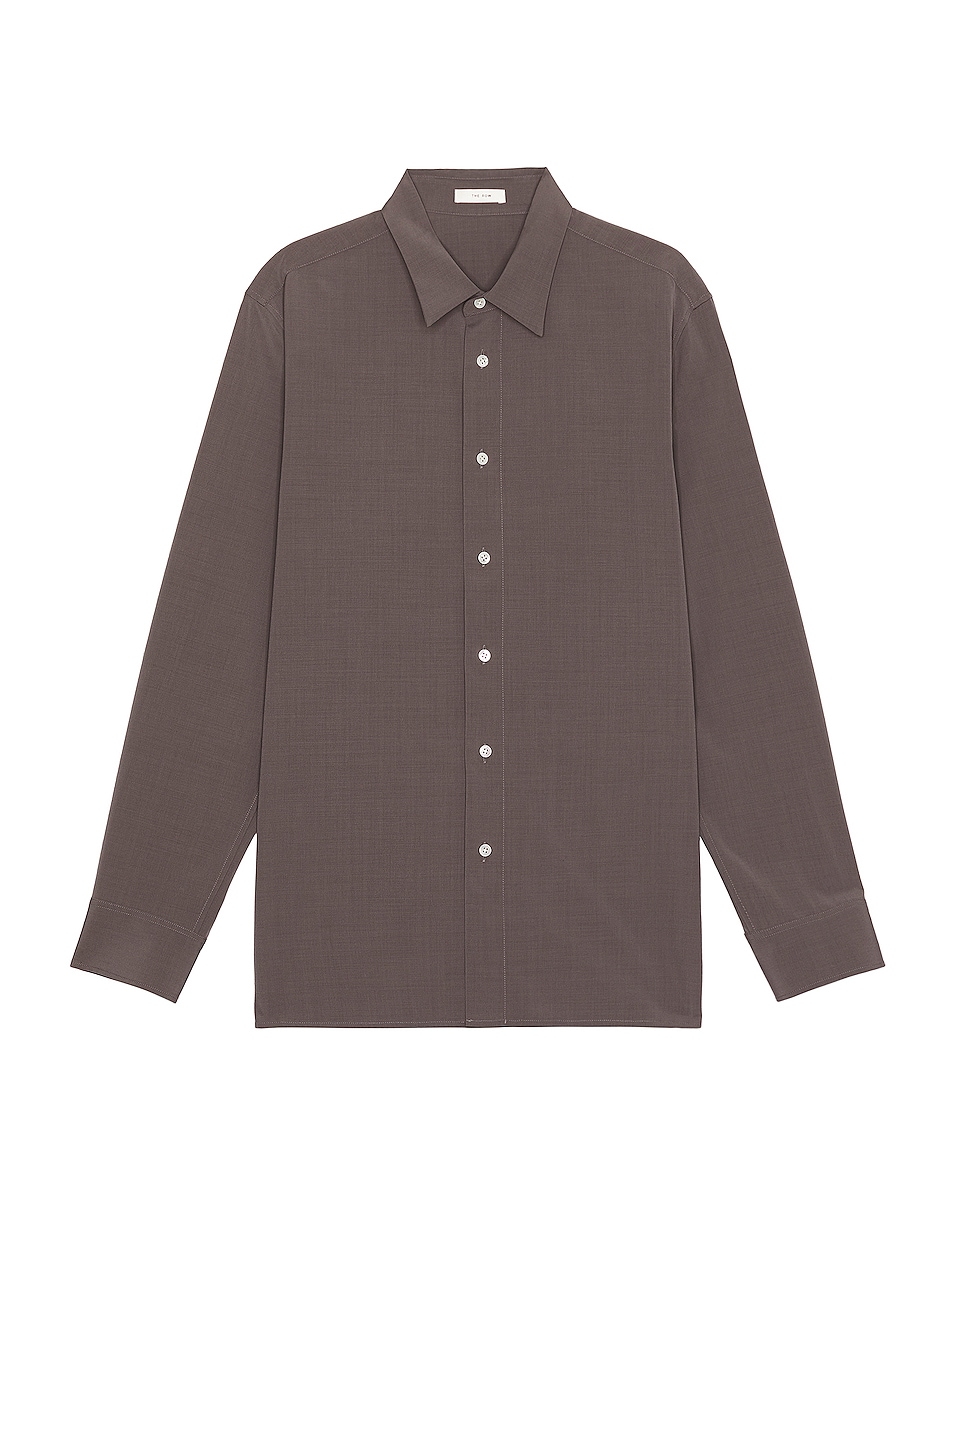 Image 1 of The Row Julio Shirt in Dove Grey